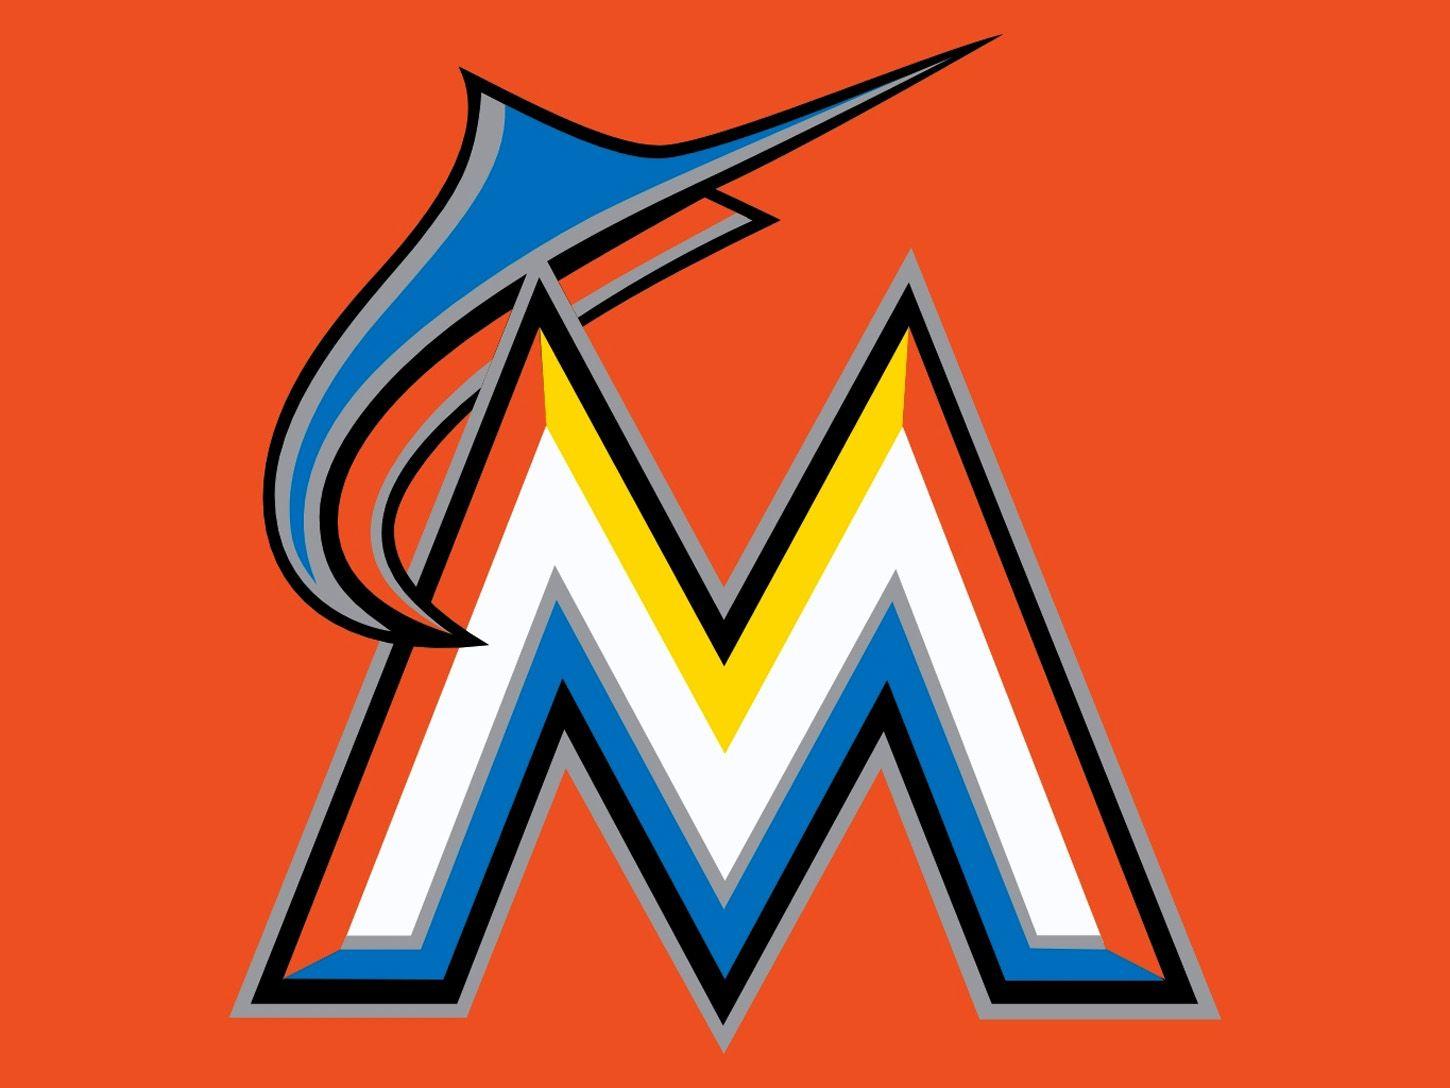 Marlins Logo - Miami Marlins Logo, Miami Marlins Symbol, Meaning, History and Evolution